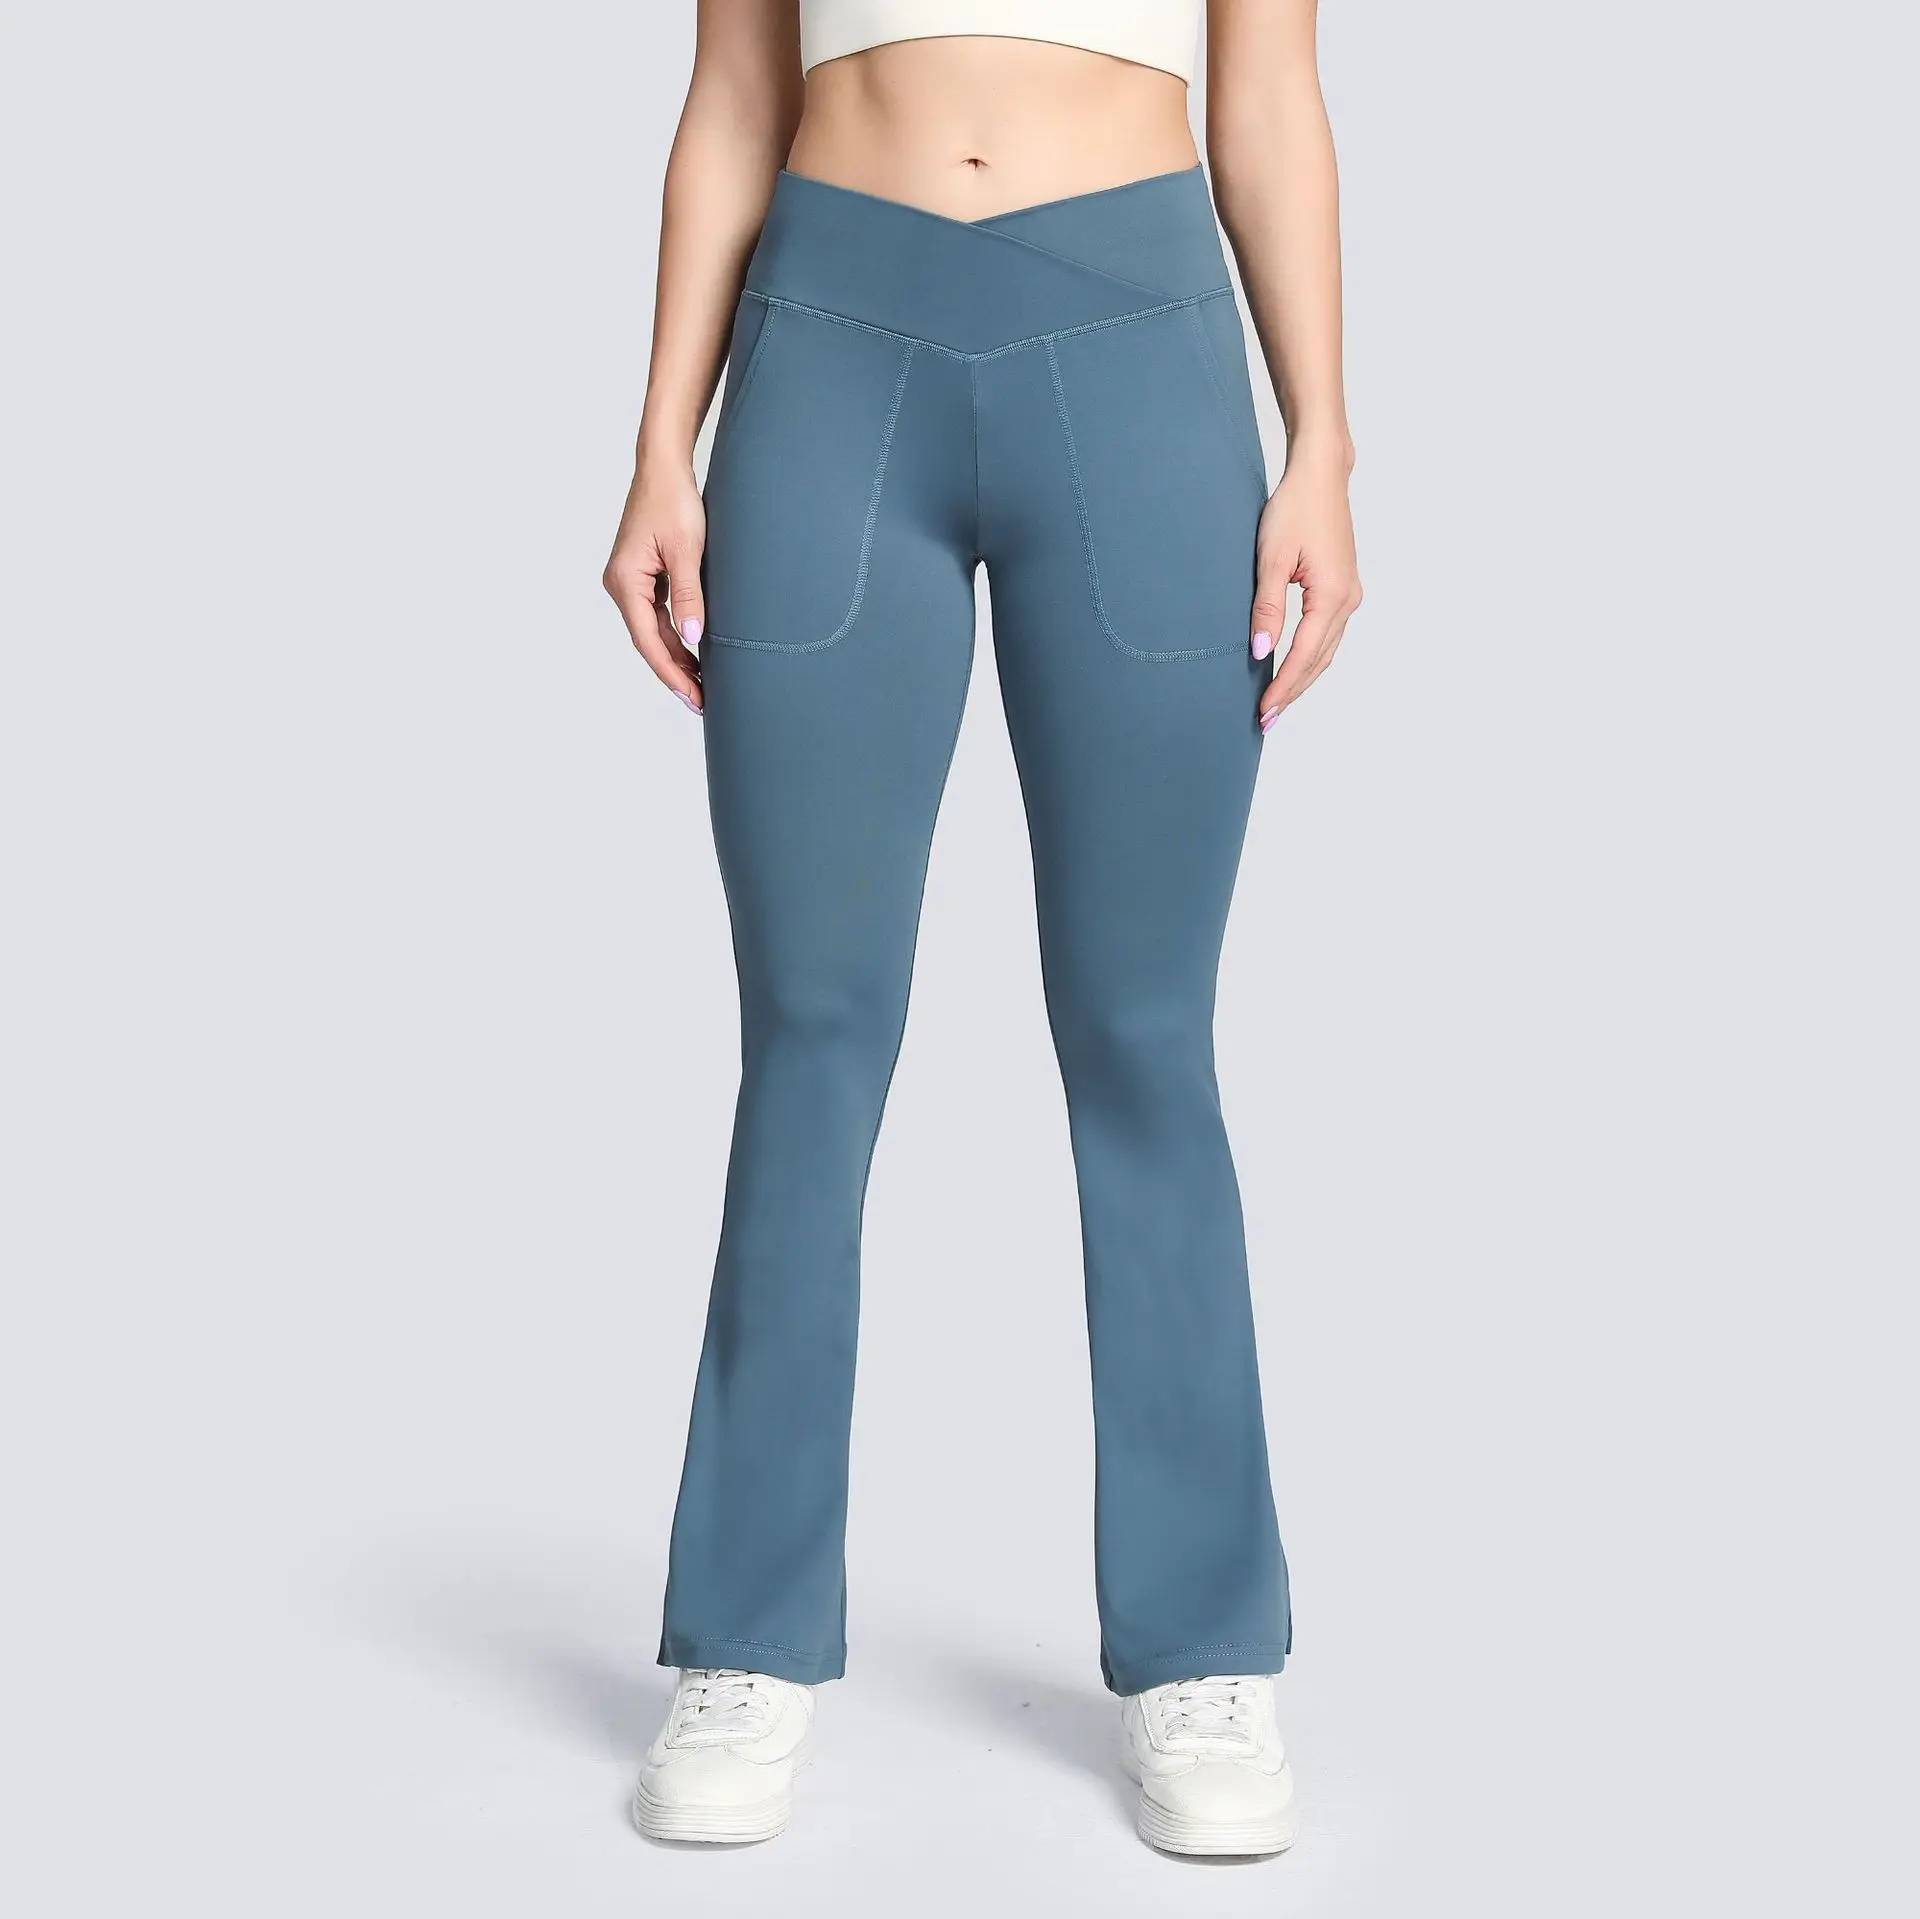 Women's High Waist Flare Yoga Leggings with Crossover Pocket and